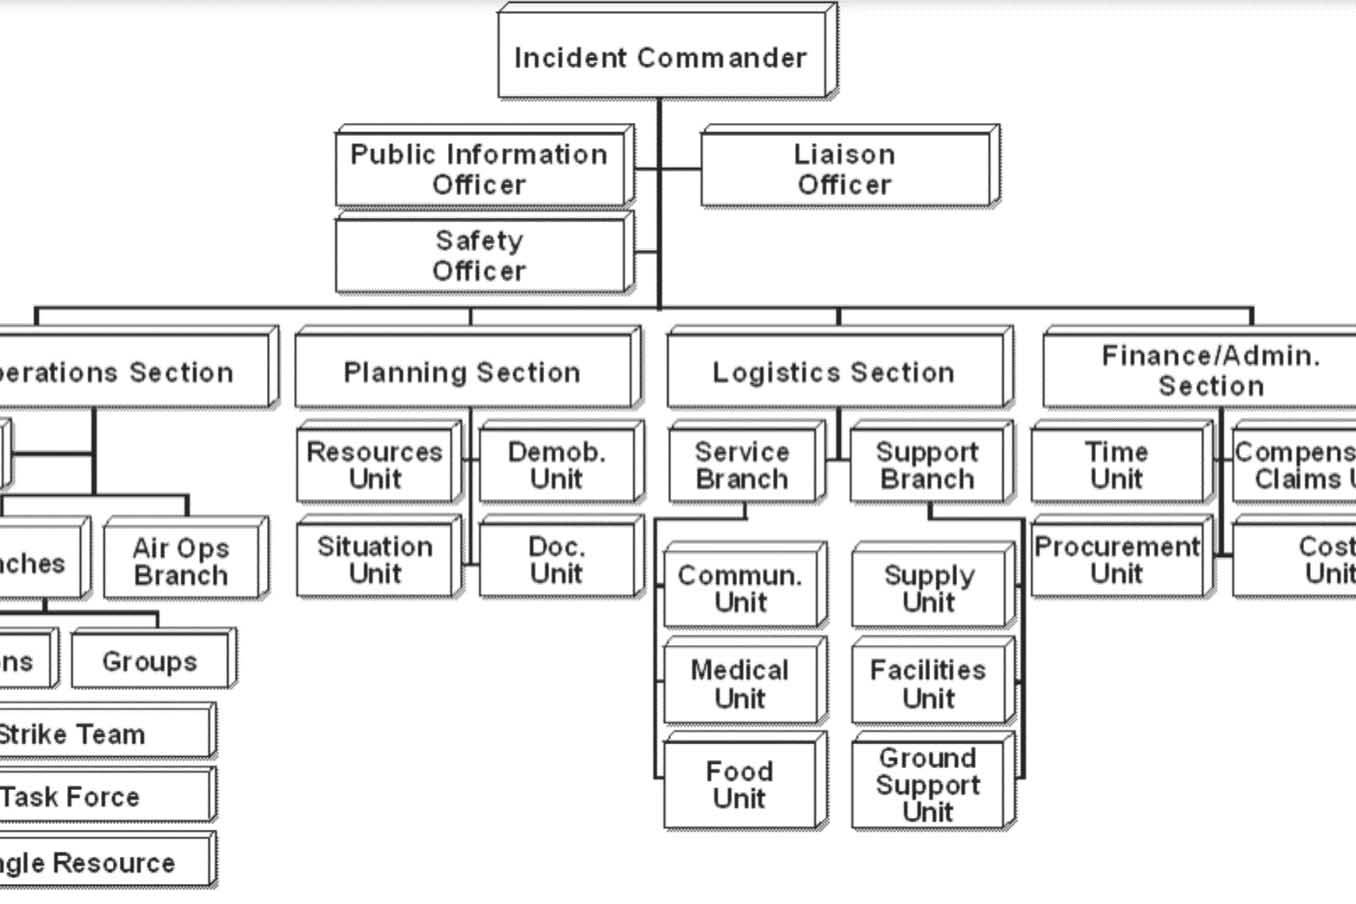 Basic Incident Command System organization chart. The ICS system has been used for many different types of incidents since its inception. (Chart from Federal Emergency Management Agency)